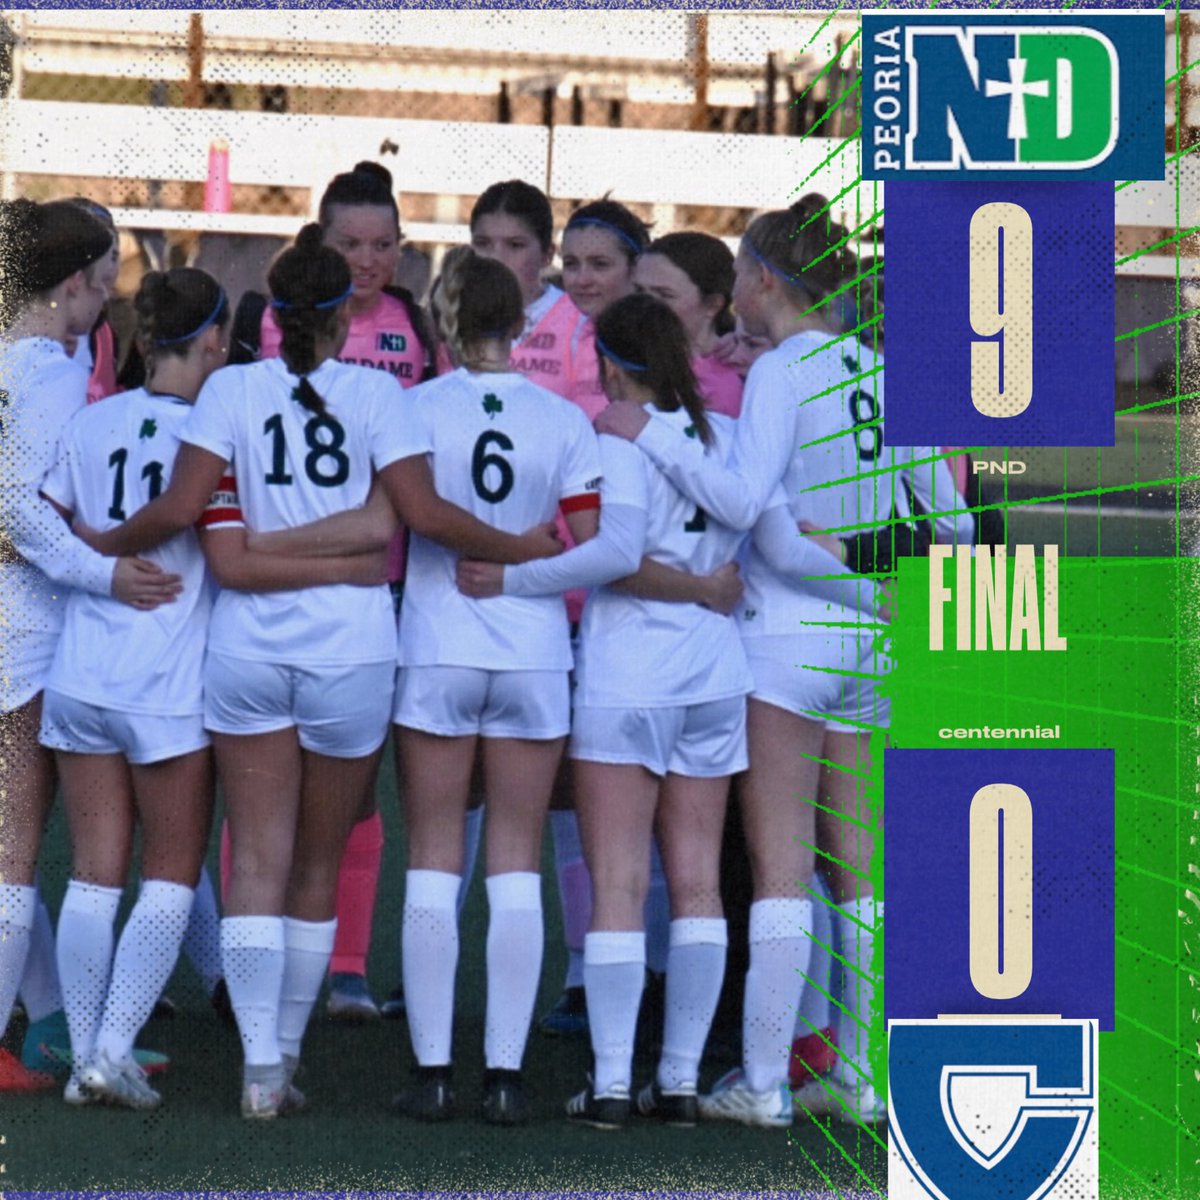 IRISH WIN!!! Some really nice finishes tonight as we come away with a conference win over Centennial! Back at it tomorrow with another conference game!! ☘️⚽️ #PNDsoccer